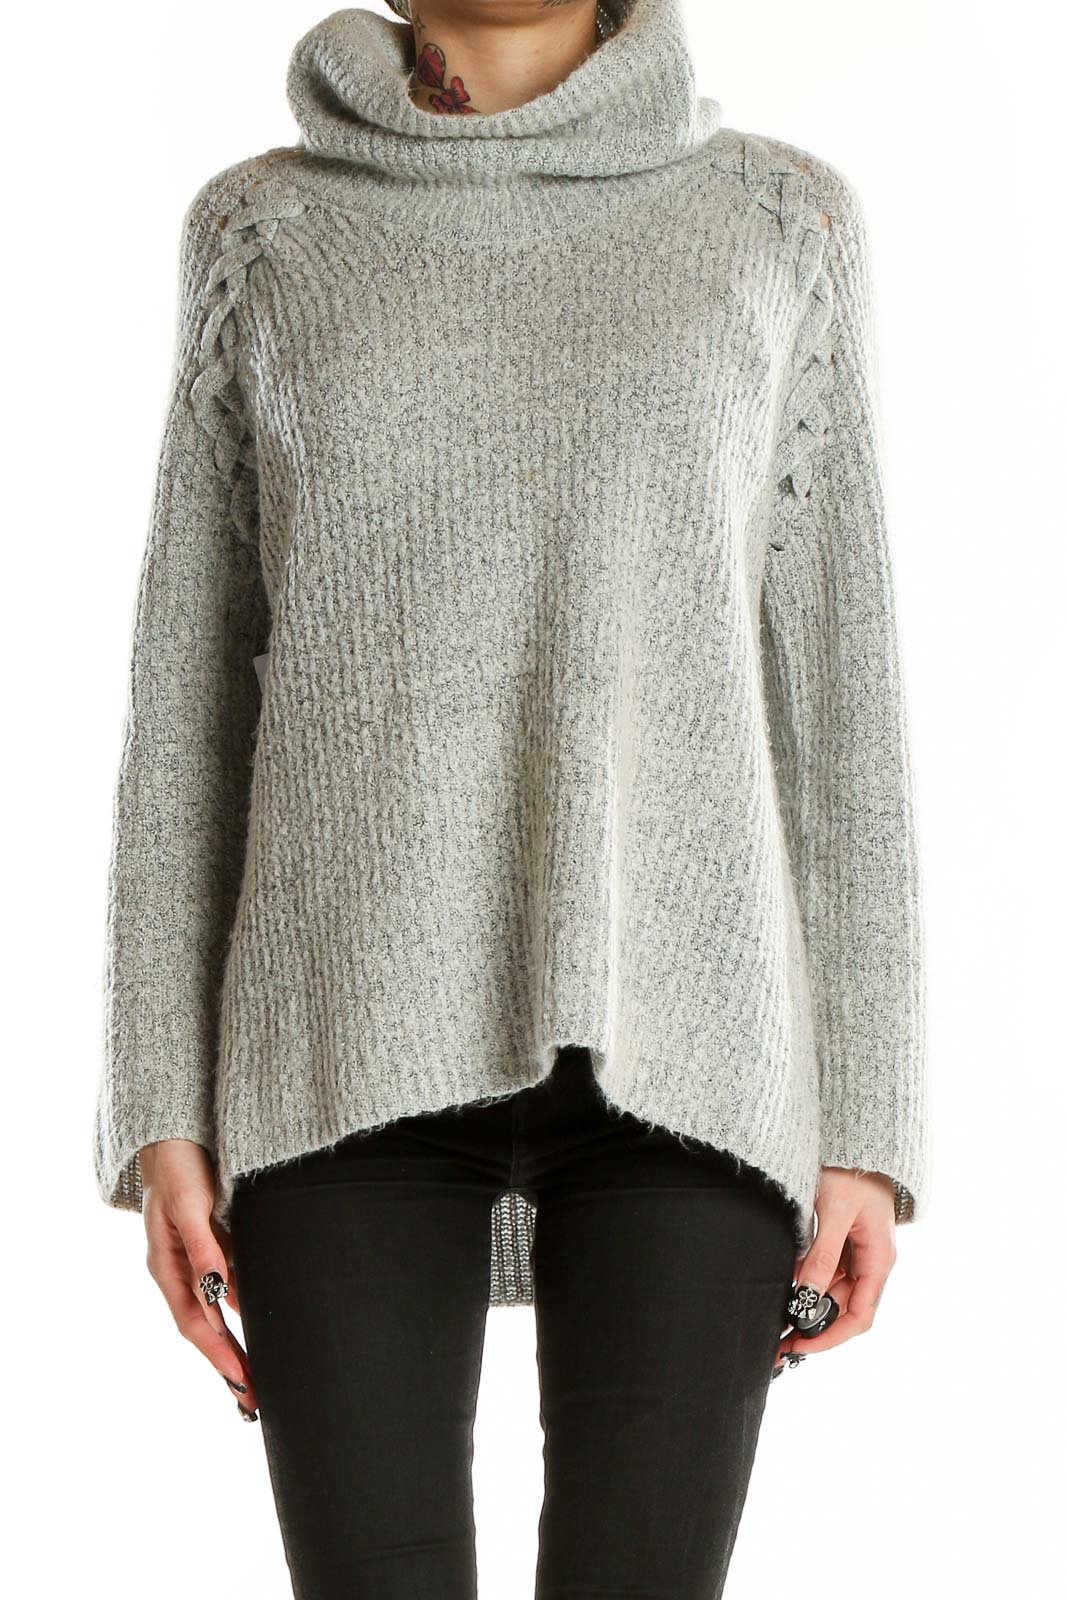 Gray Turtle Neck Texture Sweater Front